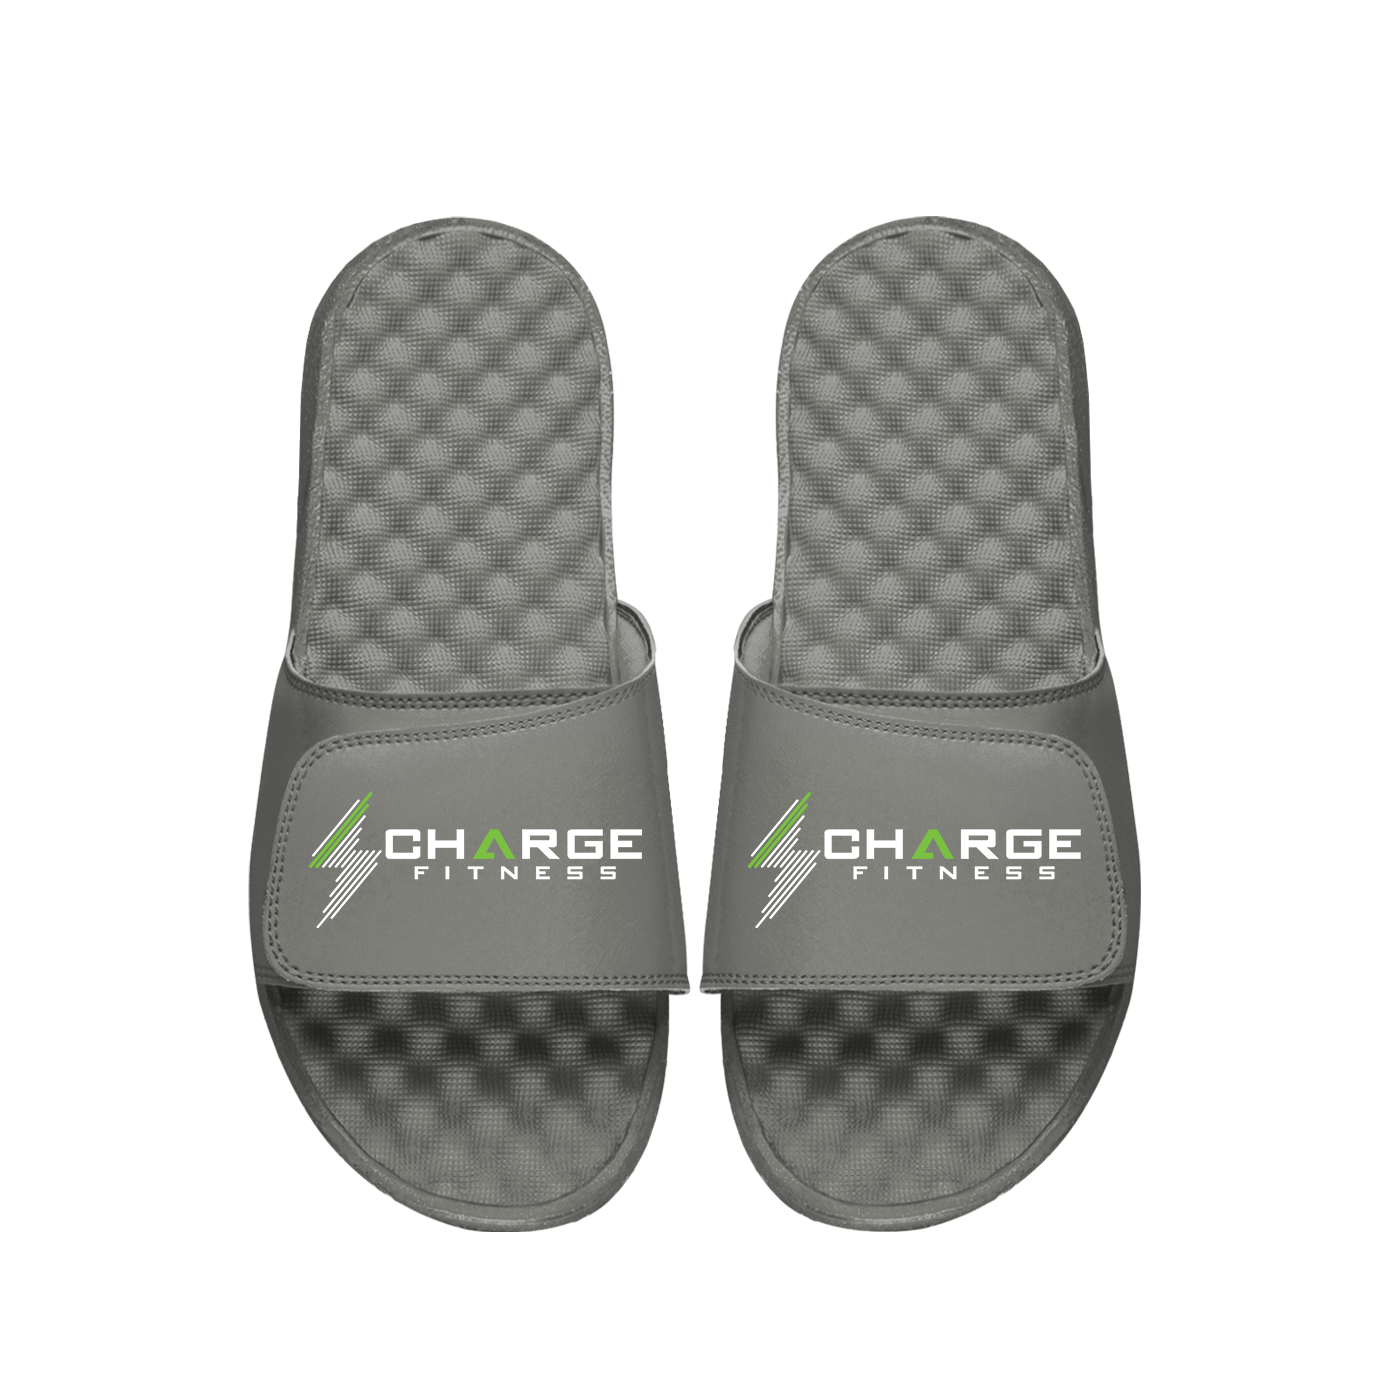 Charge Fitness & Performance Primary PERSONALIZE Slides